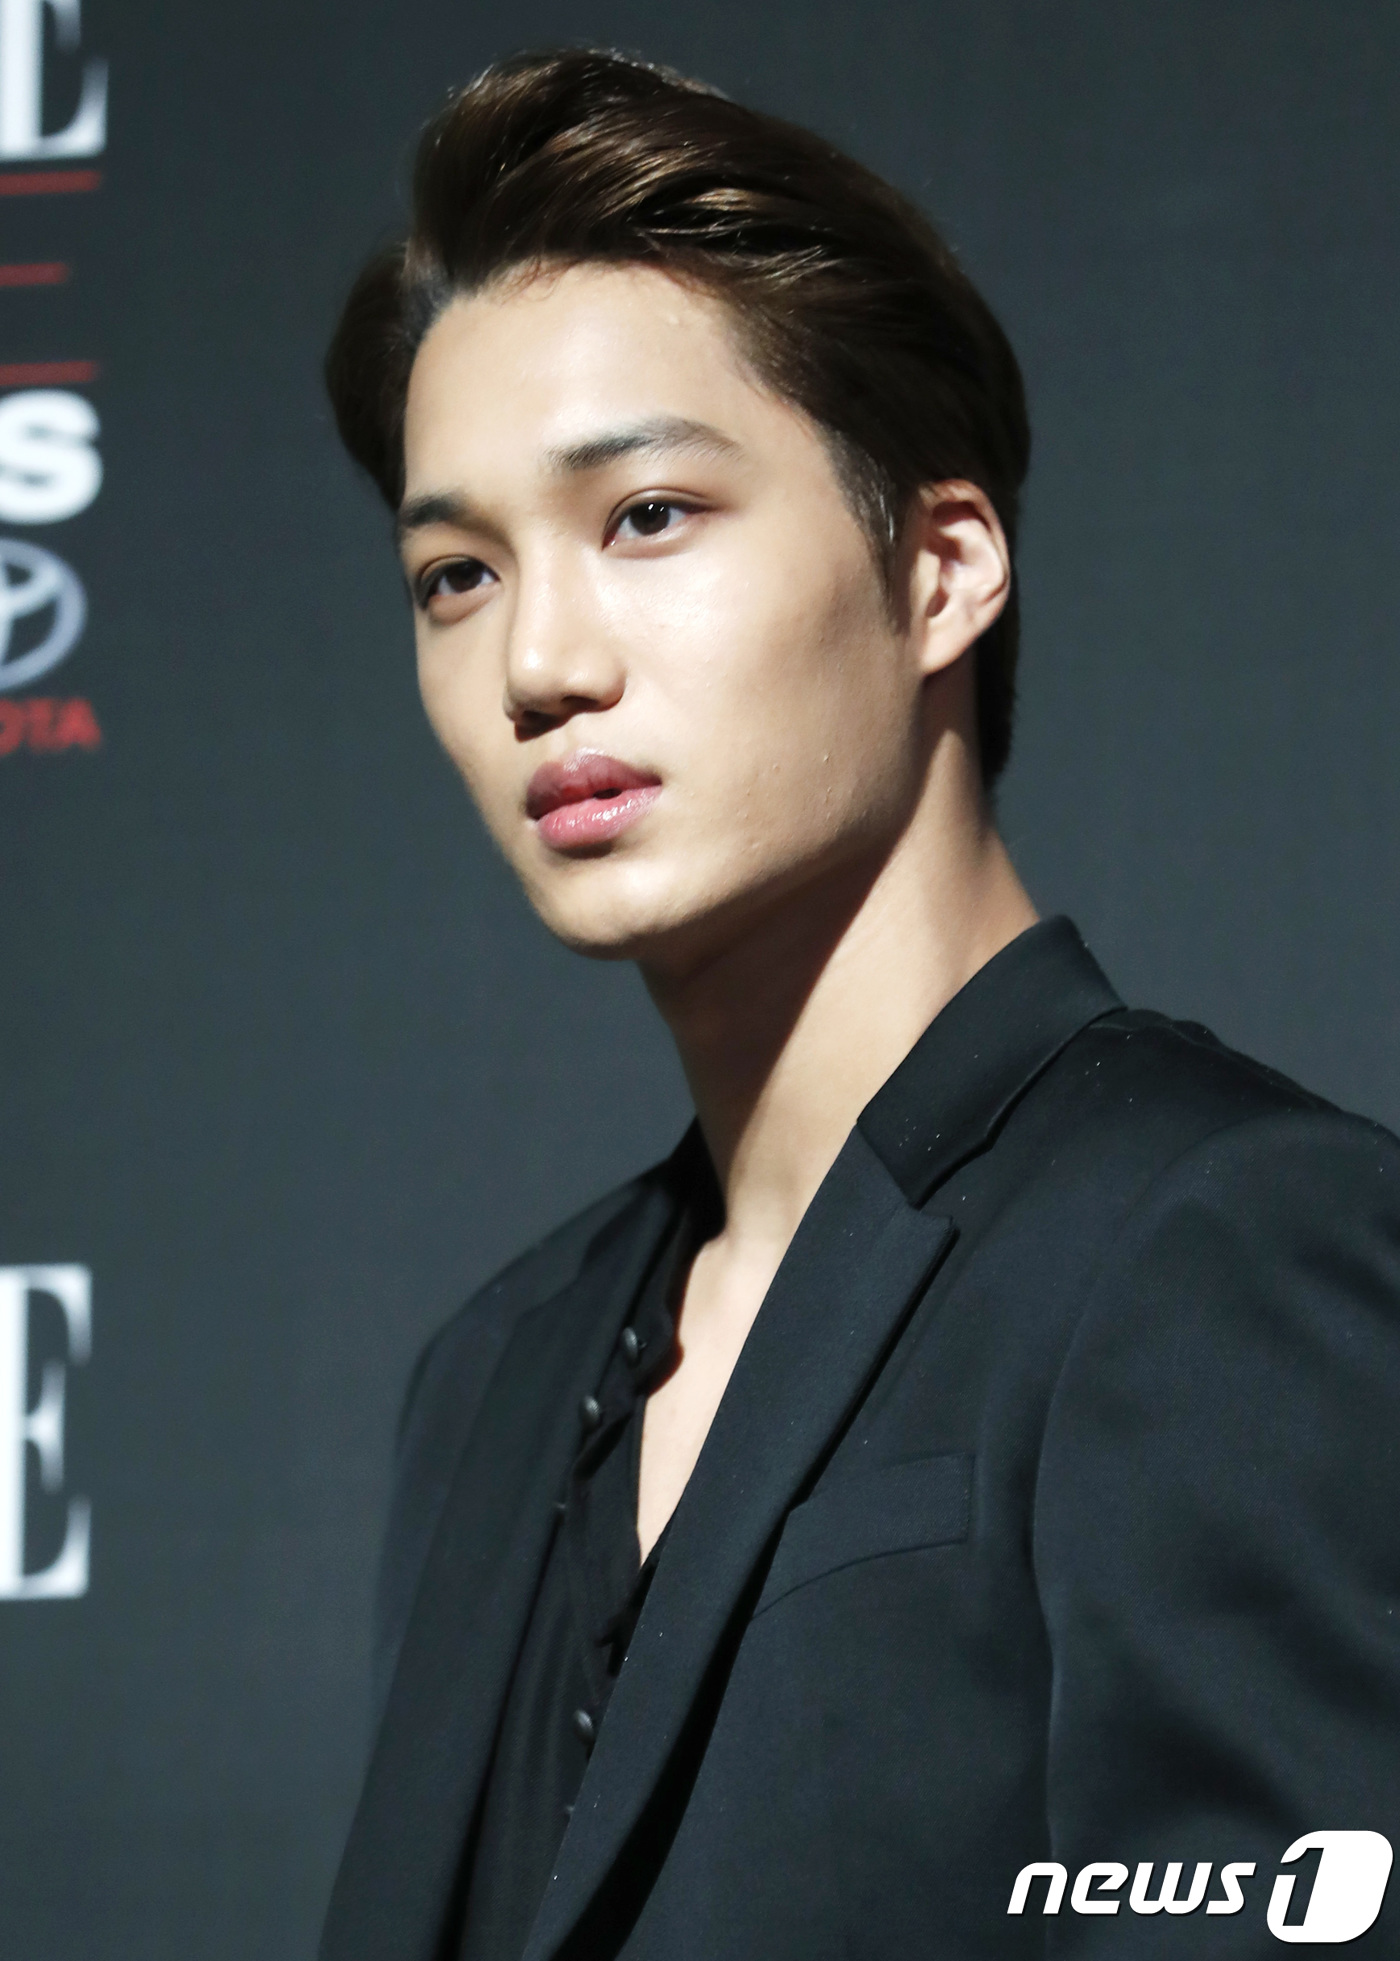 Seoul = = Group EXO member Kai debuts as Solo singer.As a result of the coverage on March 3, Kai is working on the album with the aim of releasing it in the second half of this year.Kai, who started his career as a group EXO in 2012, has made a new challenge as a solo singer in eight years after debut.Within the group, it is the fifth Solo debut after Baekhyun, Chen, Suho and Ray.Kai has been recognized for his outstanding performance in EXO activities, so expectations are rising for the stage to be introduced as a solo artist.In addition to EXO activities, Kai, who has been active in various fields such as acting and entertainment, is also active as a solo singer and is expected to make another leap.